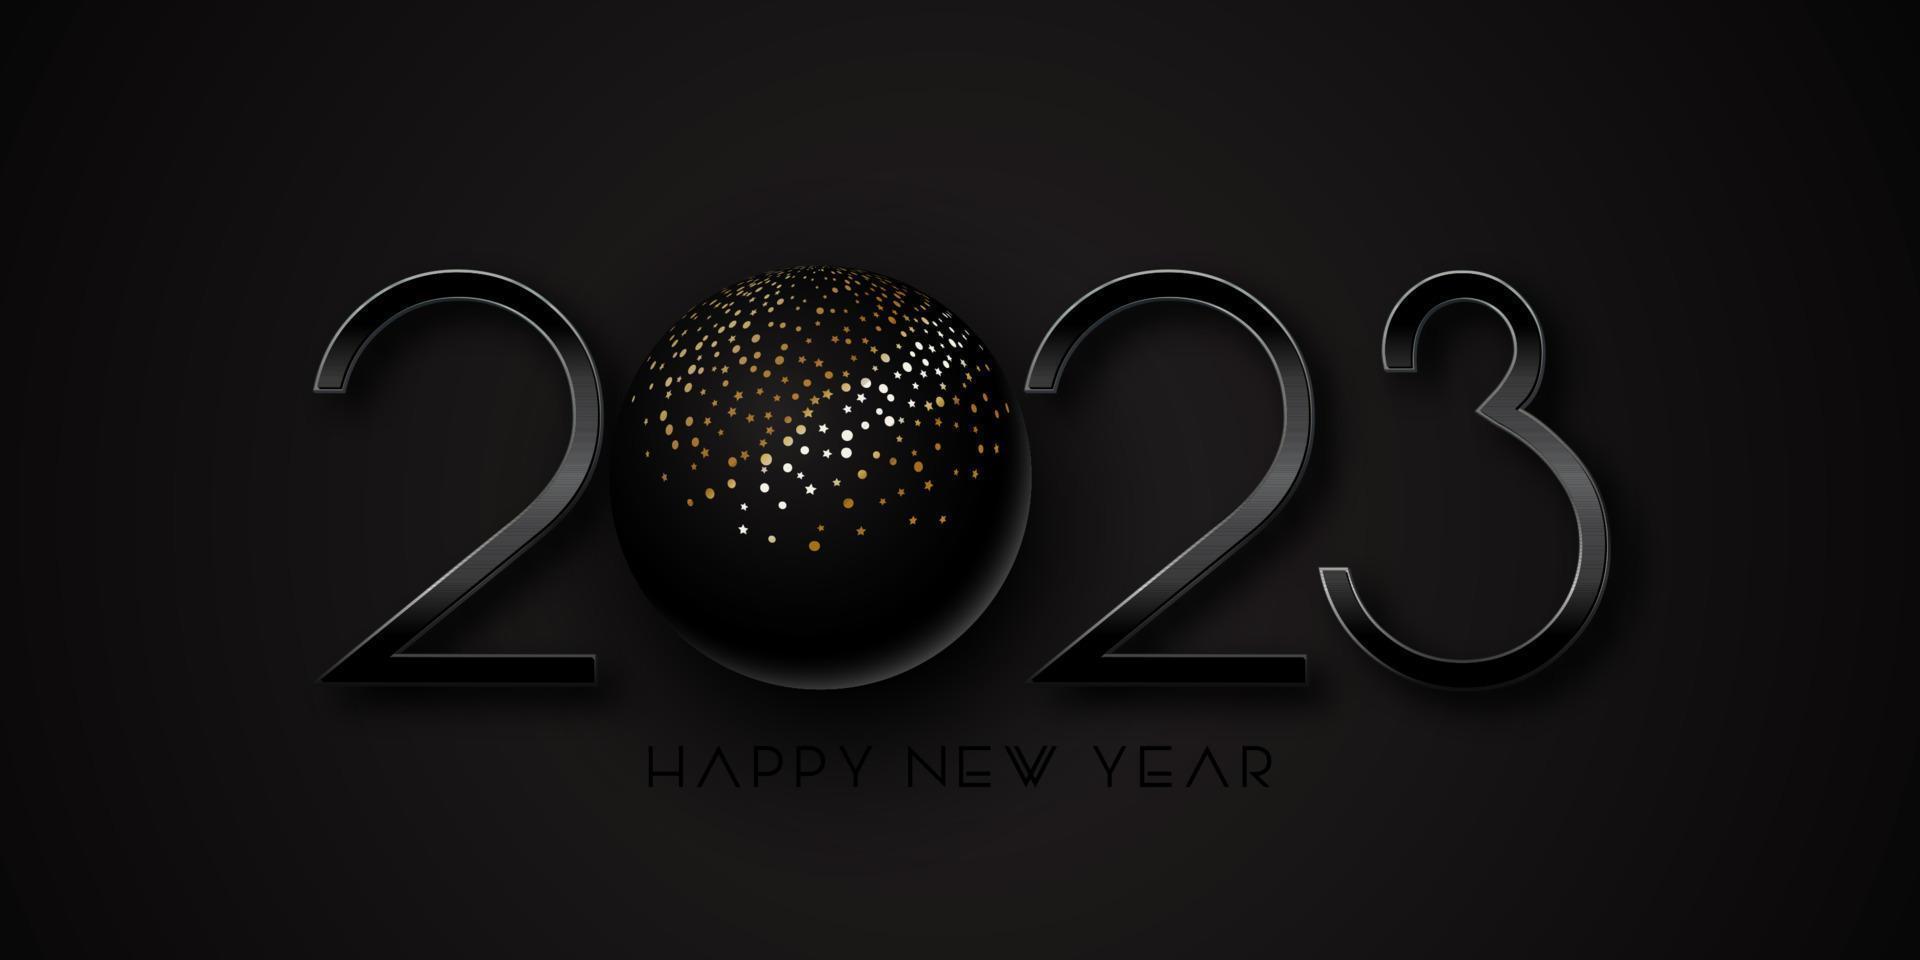 Black and gold Happy New Year banner design vector